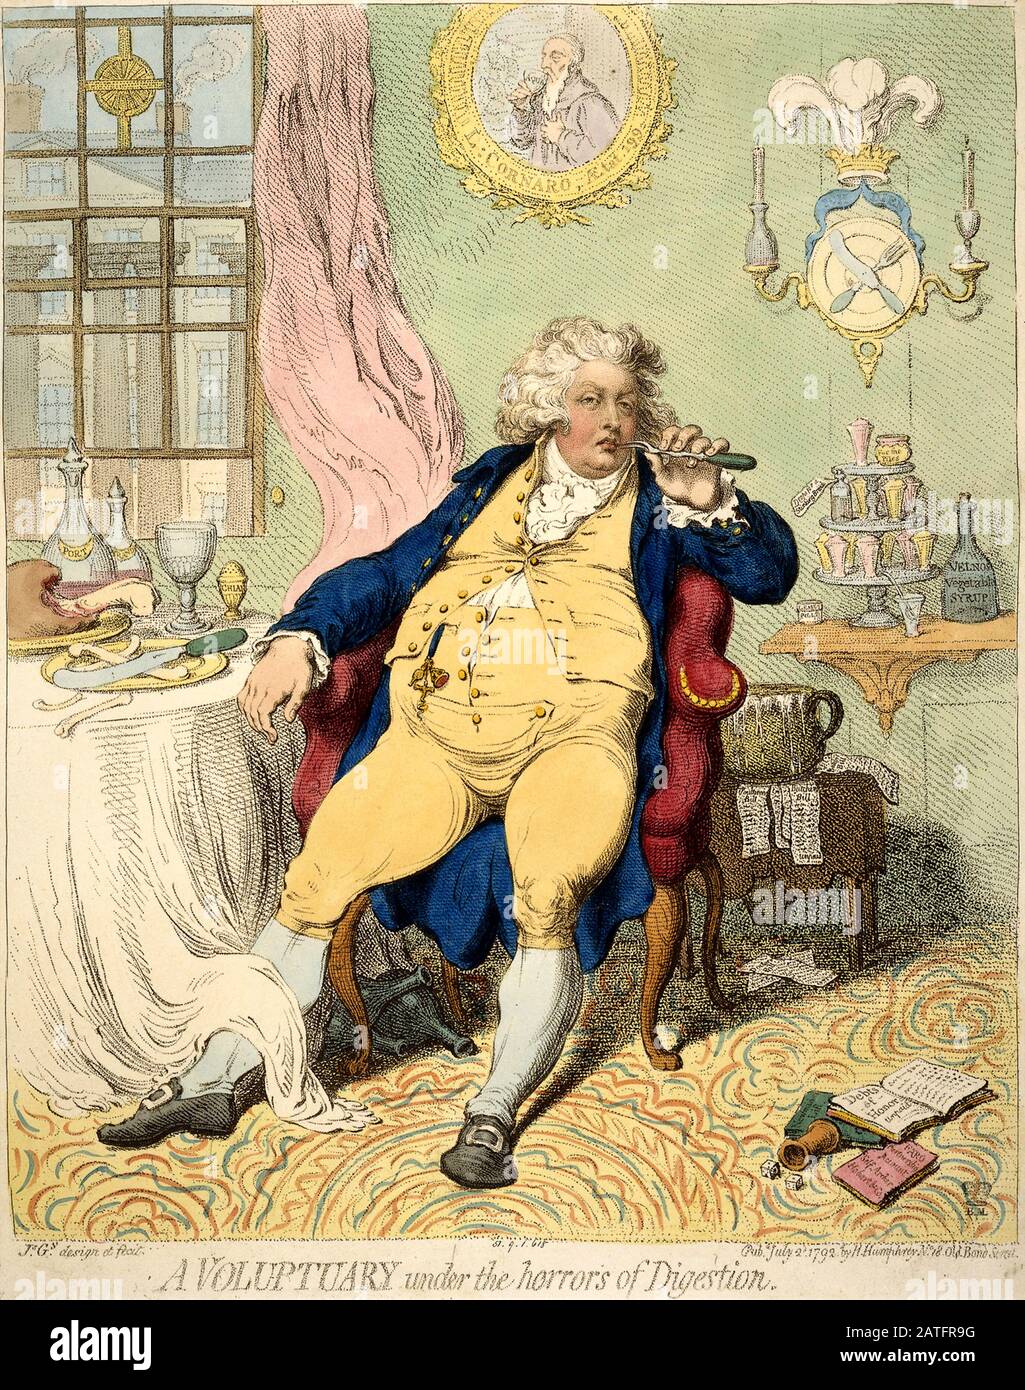 'A Voluptuary Under The Horrors of Digestion': 1792 caricature by James Gillray from George's time as Prince of Wales. Caricature of George IV as the Prince of Wales, languid with repletion, leaning back in an arm-chair, at a table covered with remains of a meal, holding a fork to his mouth. His waistcoat is held together by a single button across his distended stomach. In the background, the Prince of Wales' three ostrich feathers emblem is shown above a knife and fork crossed on a plate (instead of a coat of arms). Stock Photo